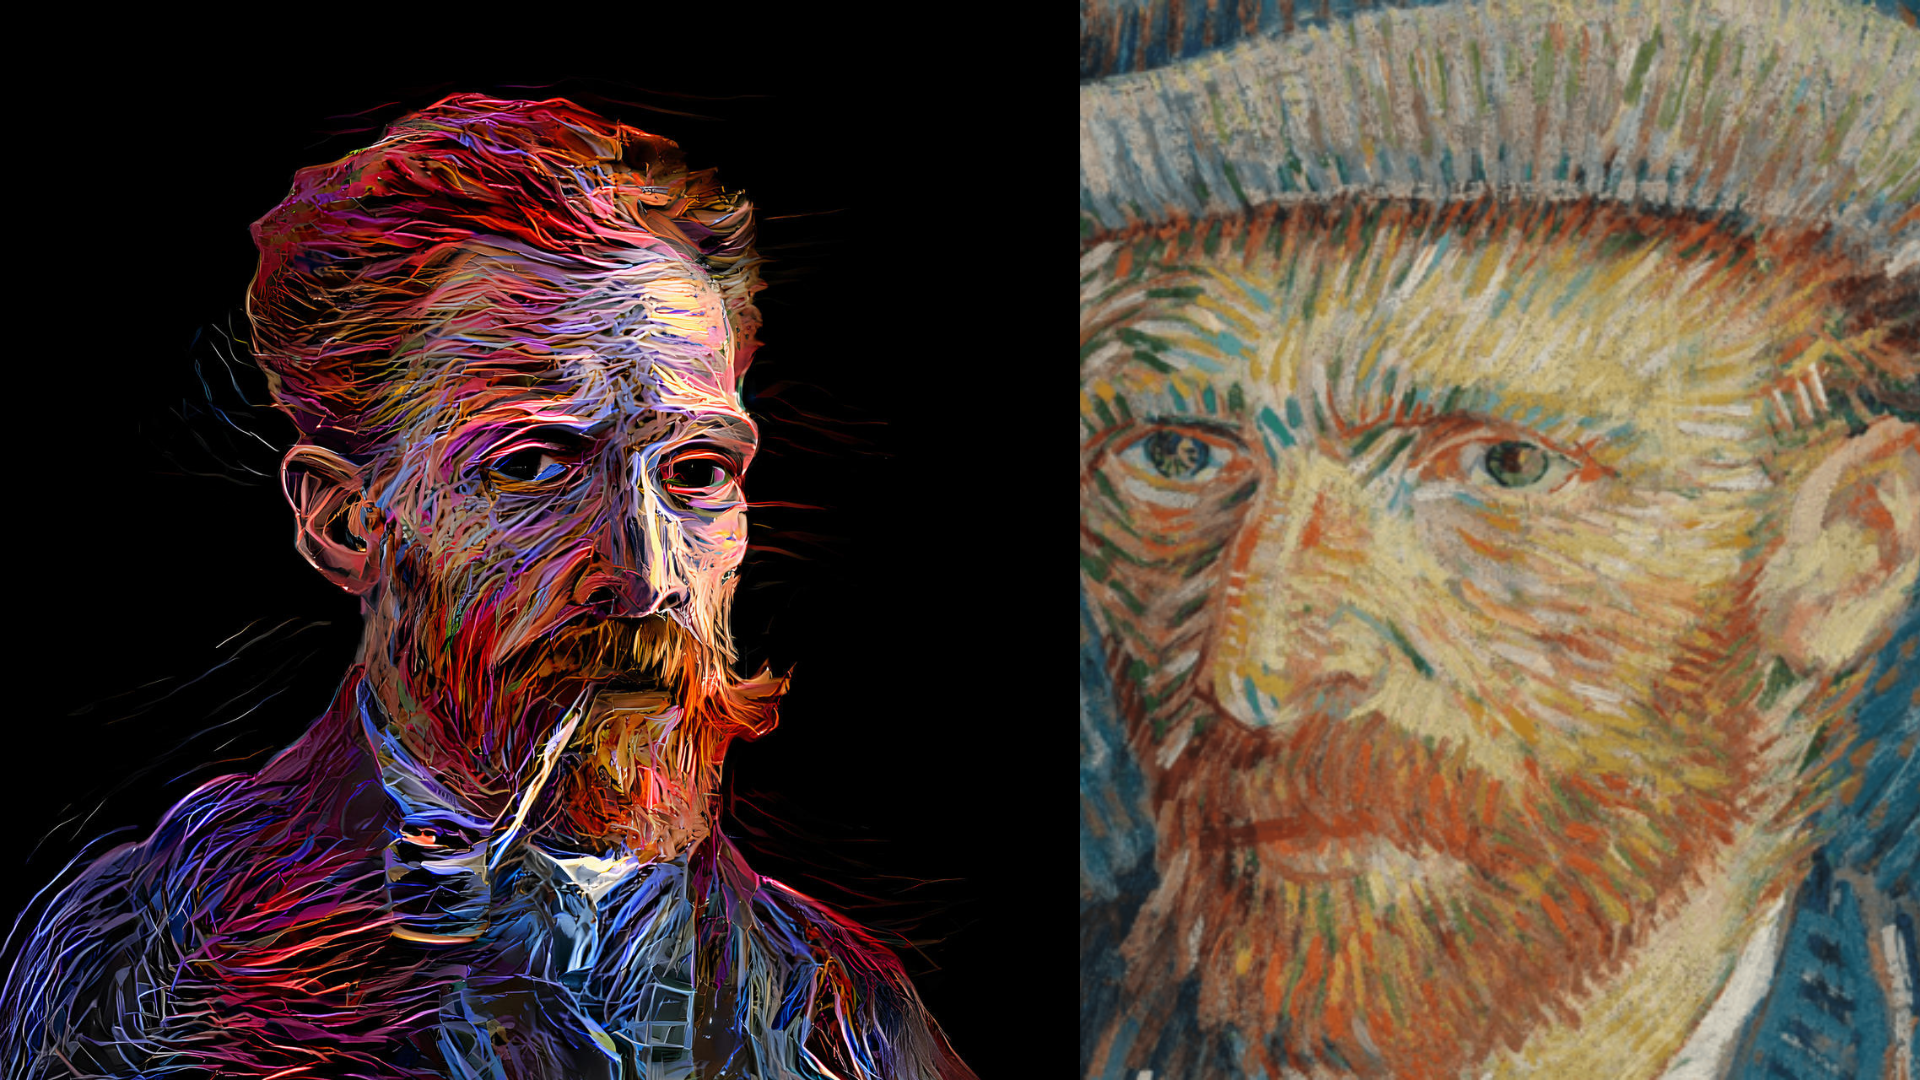 picture displaying NFT version of Van Gogh art that recently sold for millions